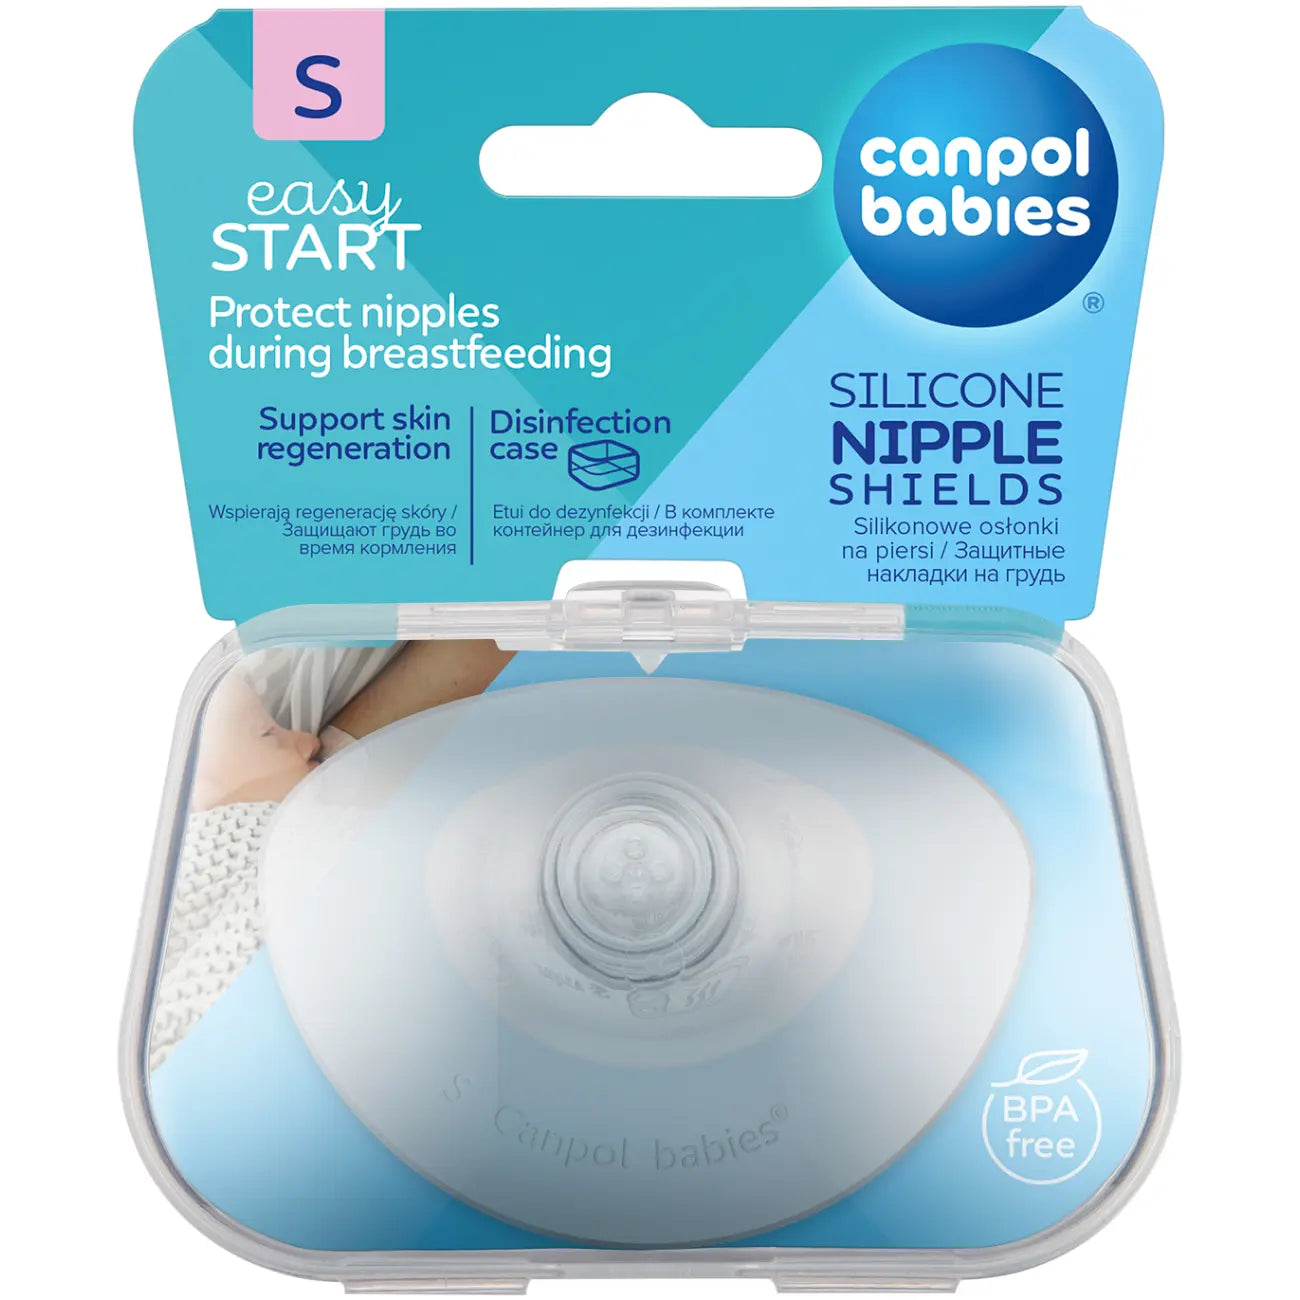 Canpol Babies: Easystart Silicone Shorts Silicone Stem Casings S 2 pcs.